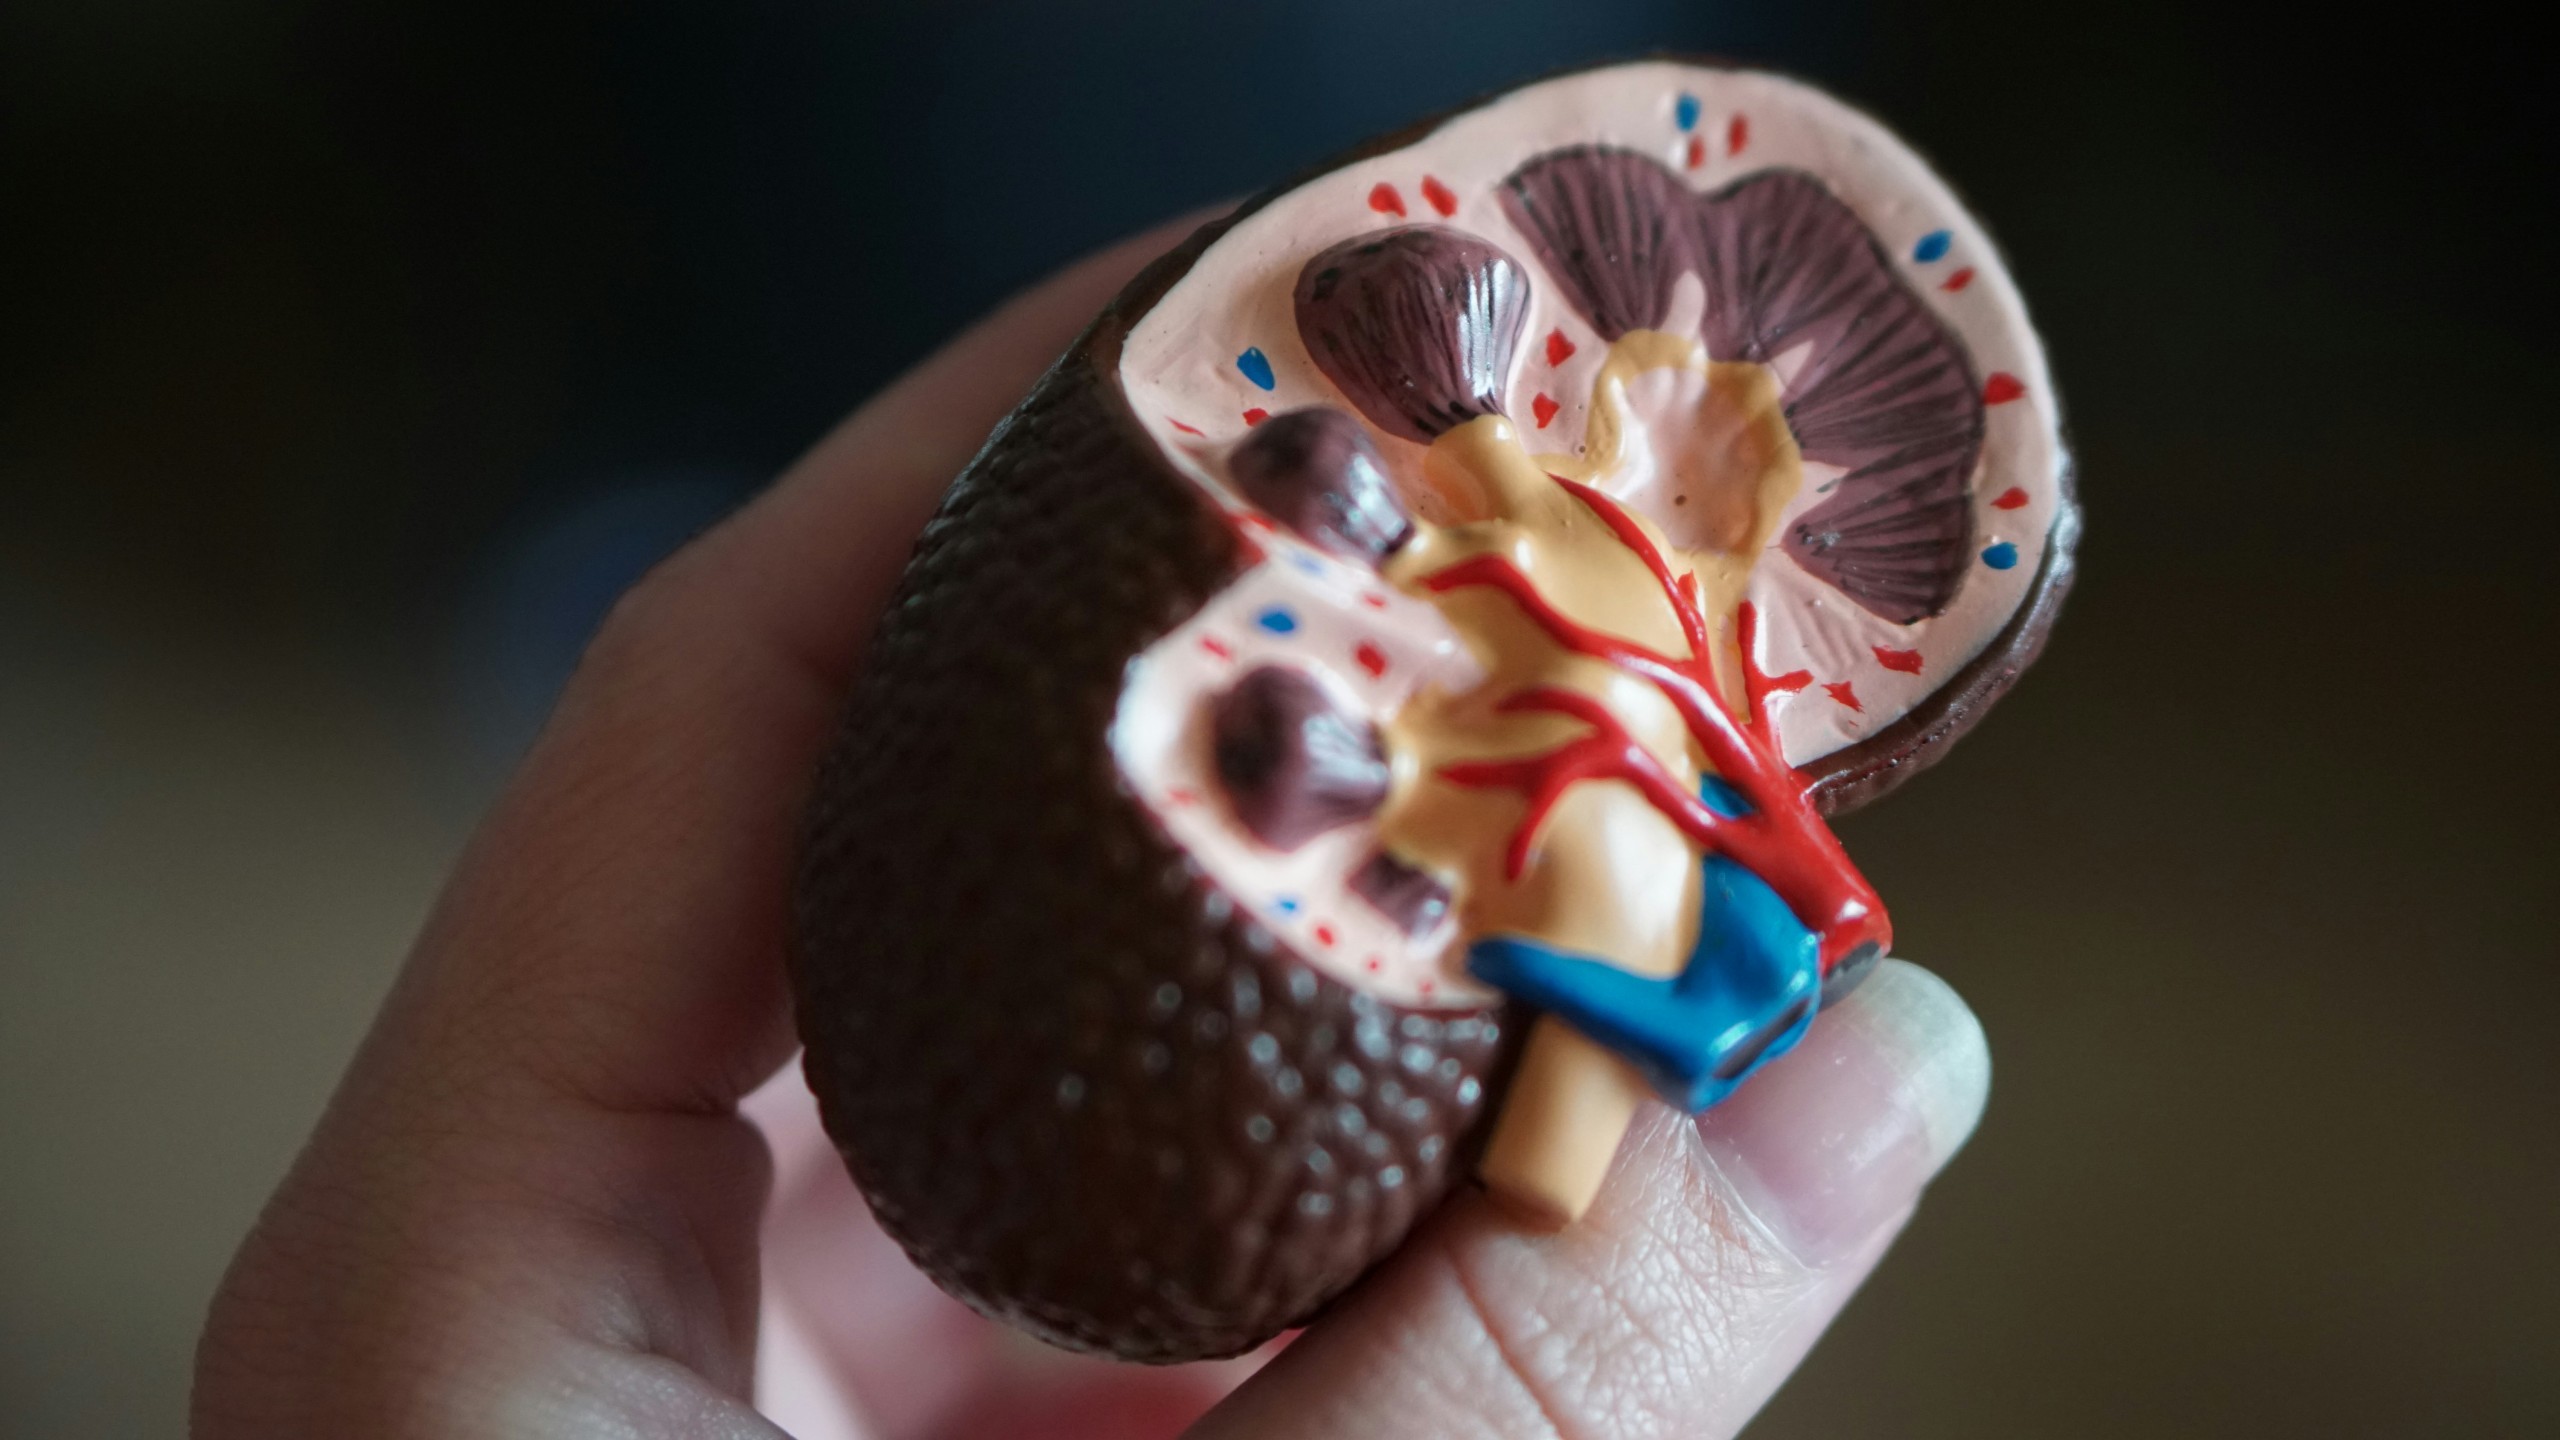 Maintaining your kidney health – Focus Supplements